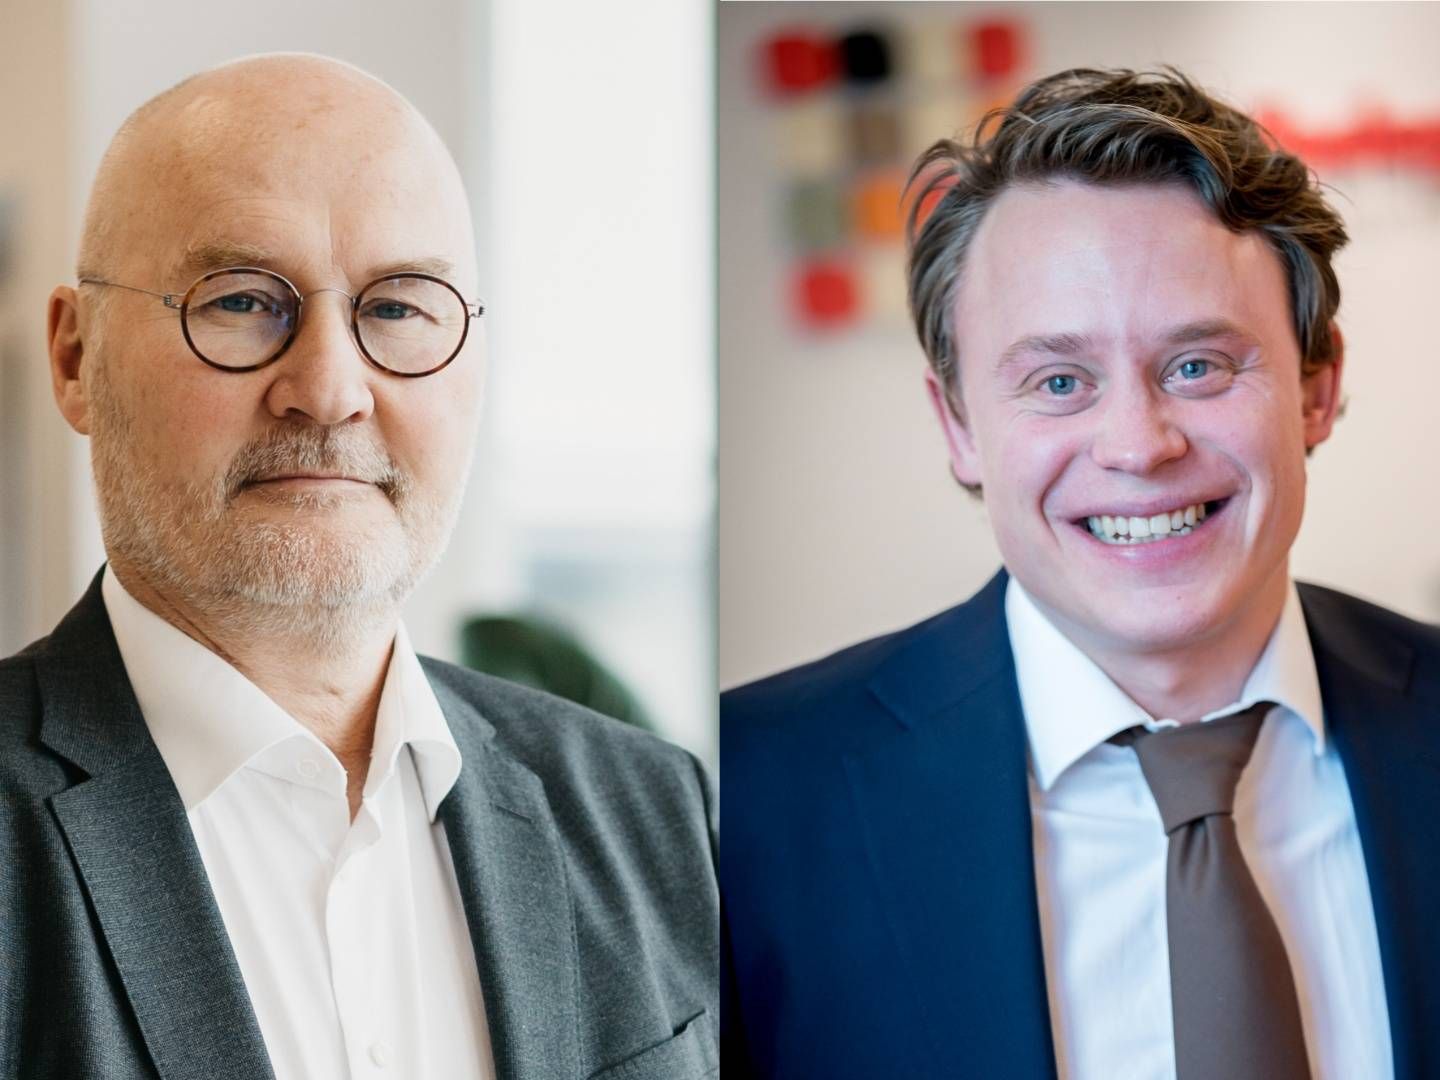 Bernt S. Zakariassen, CEO of the Norwegian Fund and Asset Management Association and Fredrik Hård, economist at the Swedish Investment Fund Association. | Photo: PR / Norwegian Fund And Asset Management Association and Swedish Investment Fund Association